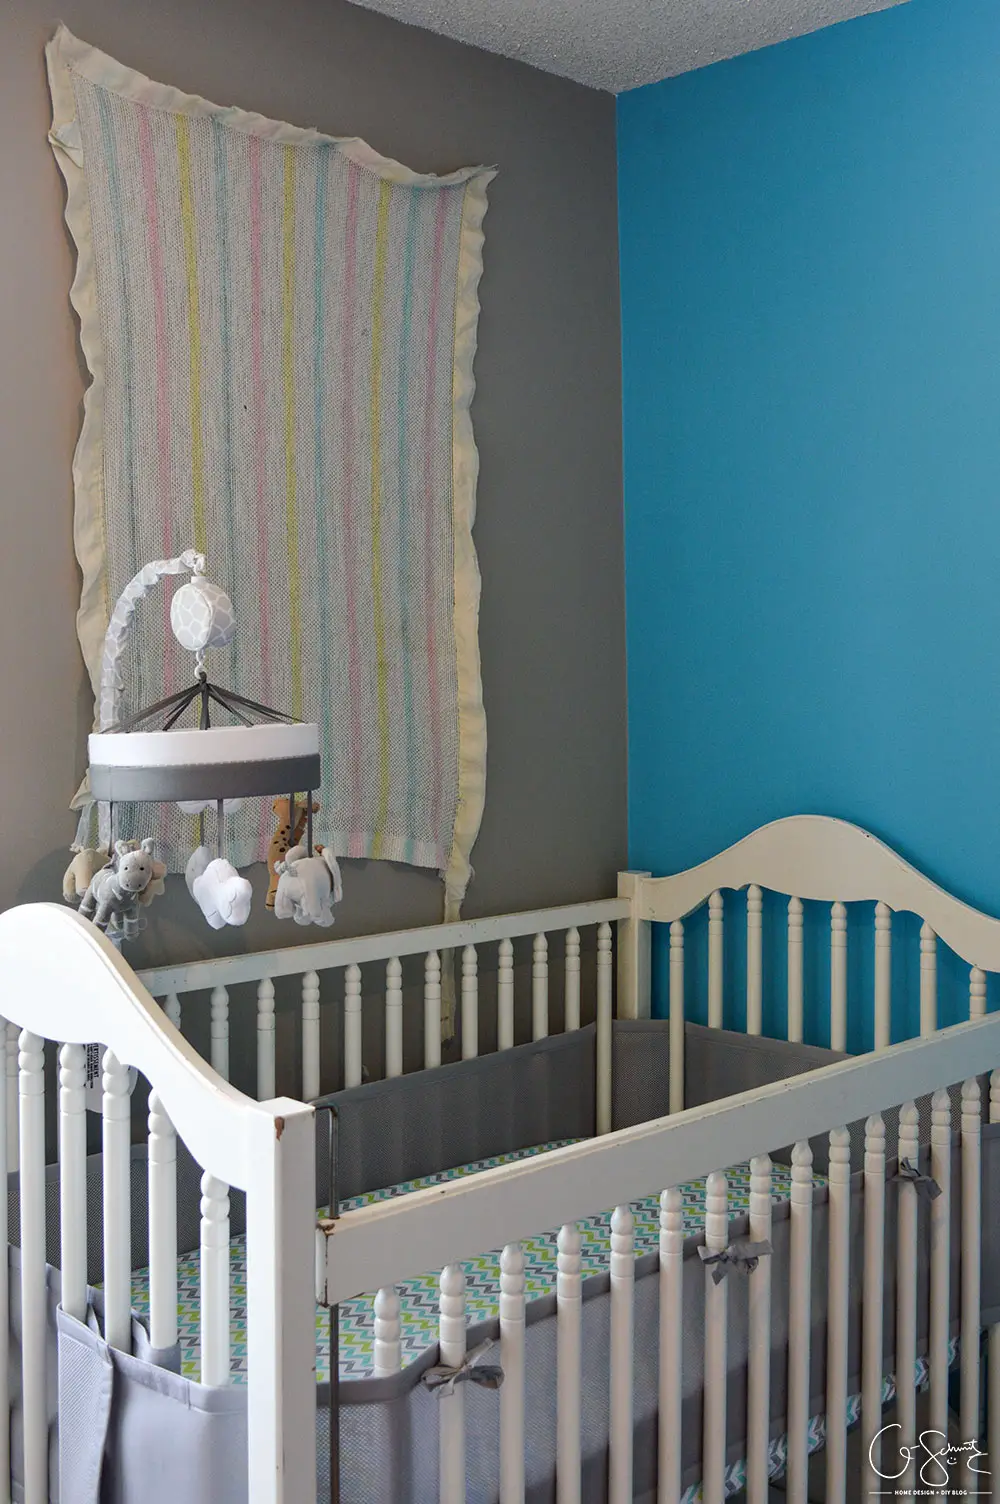 I finished our neutral nursery, and I’ve got all the essentials (crib, rocking chair, change table)… but would you mind helping decide if we need a rug?